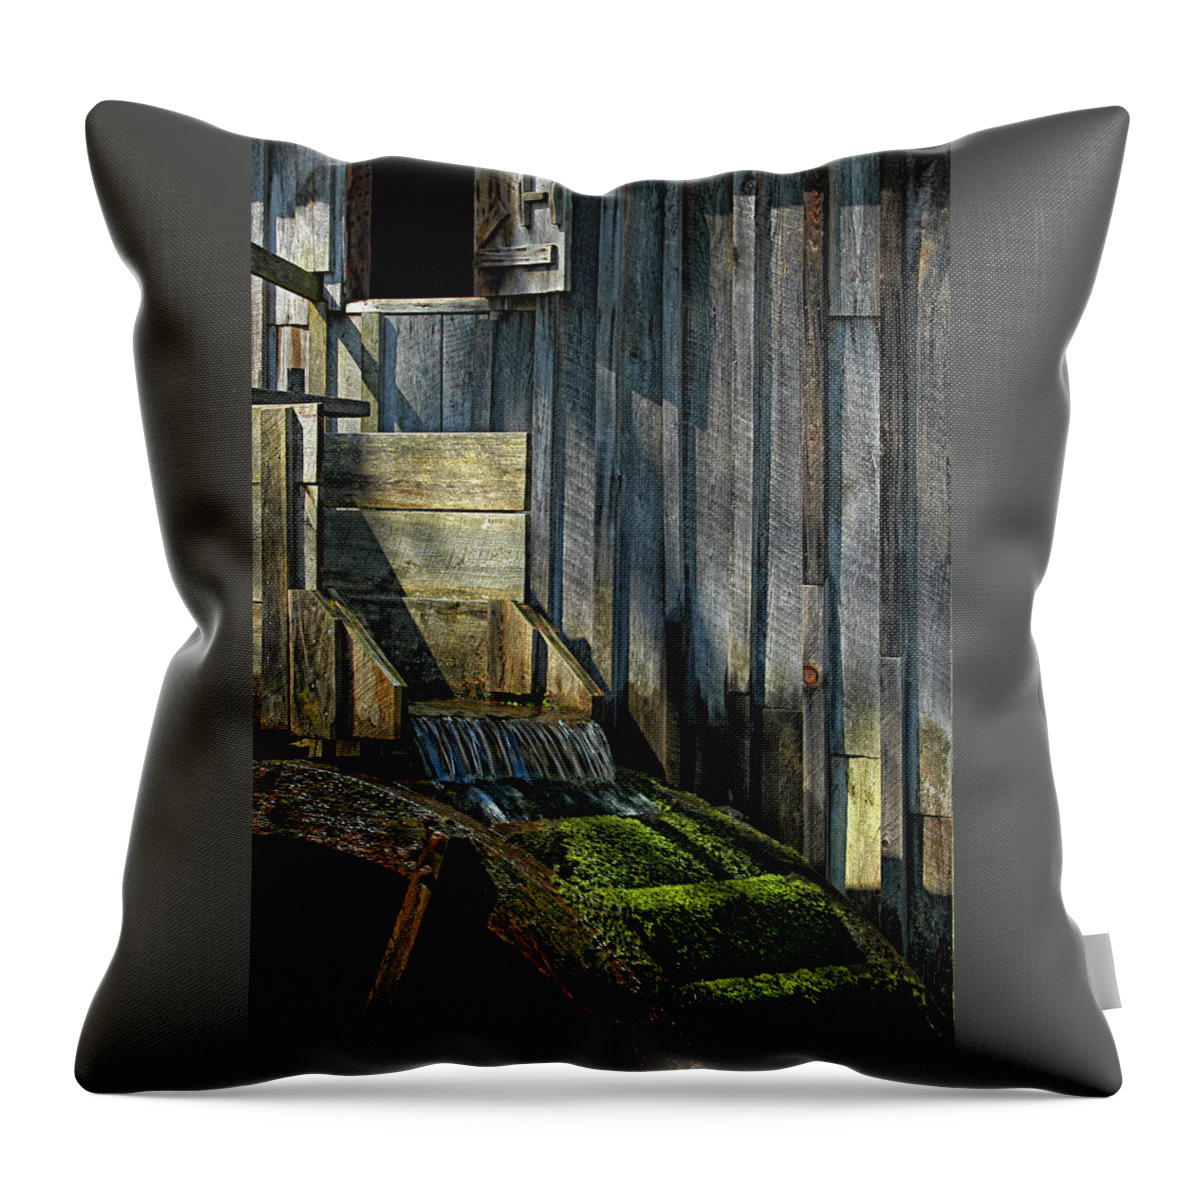 Water Throw Pillow featuring the photograph Rustic Water Wheel with Moss by Mitch Spence